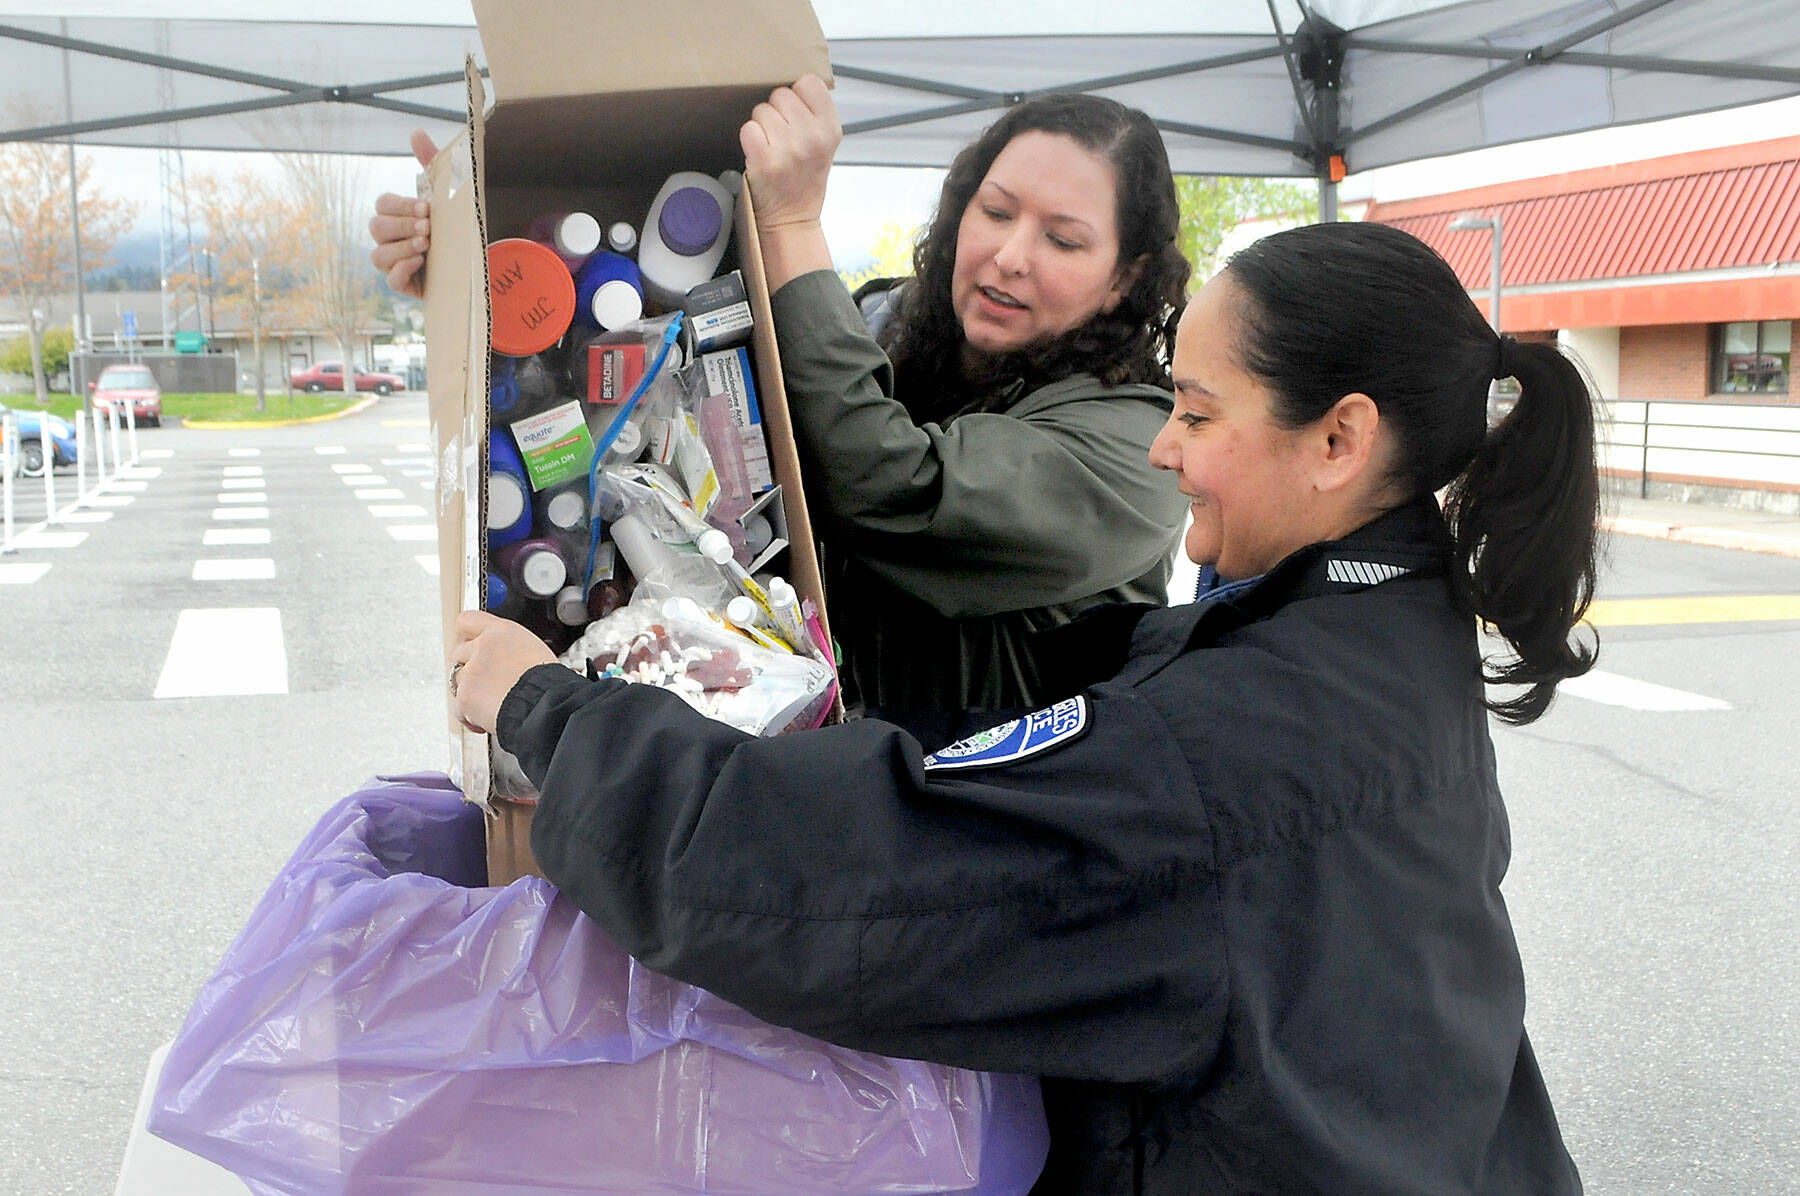 Keith Thorpe/Olympic Peninsula News Group
Nicole Salim, evidence manager for the Clallam County Sheriff’s Office, left, and Detective Swift Sanchez of the Port Angeles Police Department dump medicines into a collection box during National Prescription Drug Take Back Day at a drop-off site at the Clallam County Courthouse in Port Angeles on April 30. At the event, people were allowed to anonymously bring in expired, unused and unwanted prescription drugs for safe disposal. Similar drop-off sites on the North Olympic Peninsula were held in Sequim, Quilcene and Port Hadlock. Inspector Joshua Ley, Target Zero Manager with the Clallam County Sheriff’s Office, said citizens delivered 258 pounds of unwanted, unused, and/or expired medications to the courthouse drop-off location.